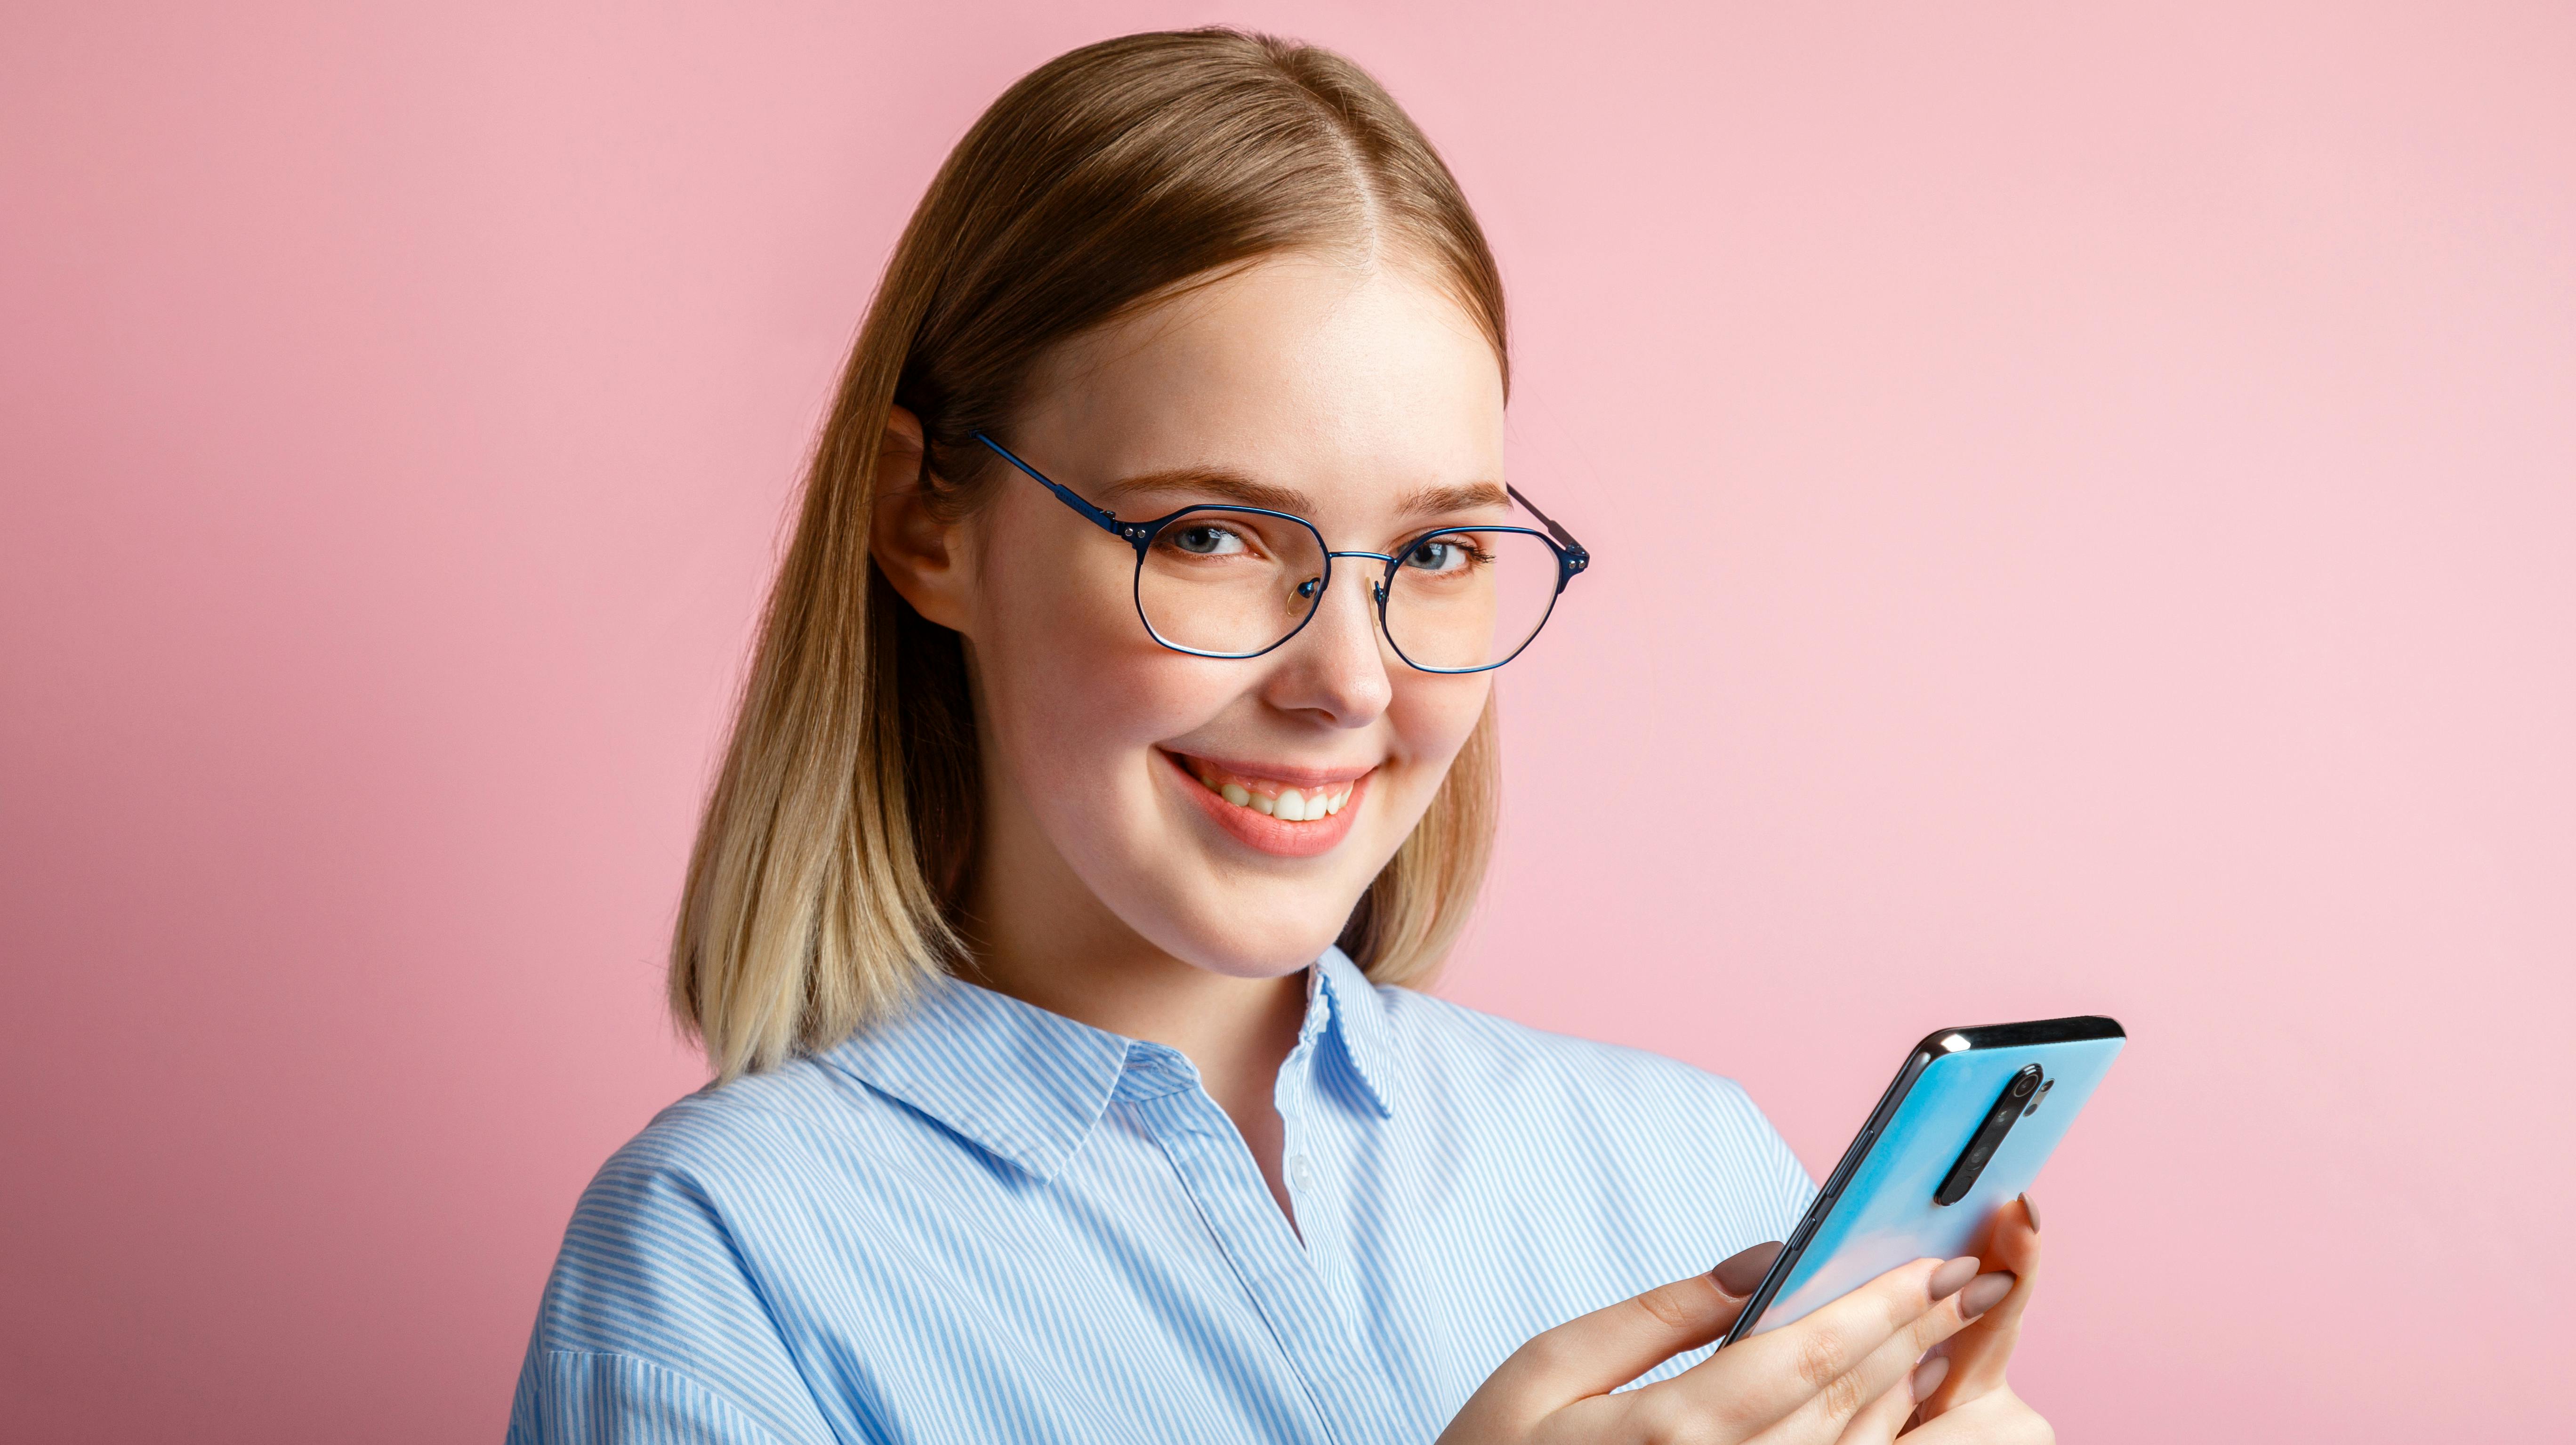 Emotional portrait of happy positive smile manager office worker in glasses use smartphone. Woman in a blue shirtwrites a message on phone isolated over color pink background